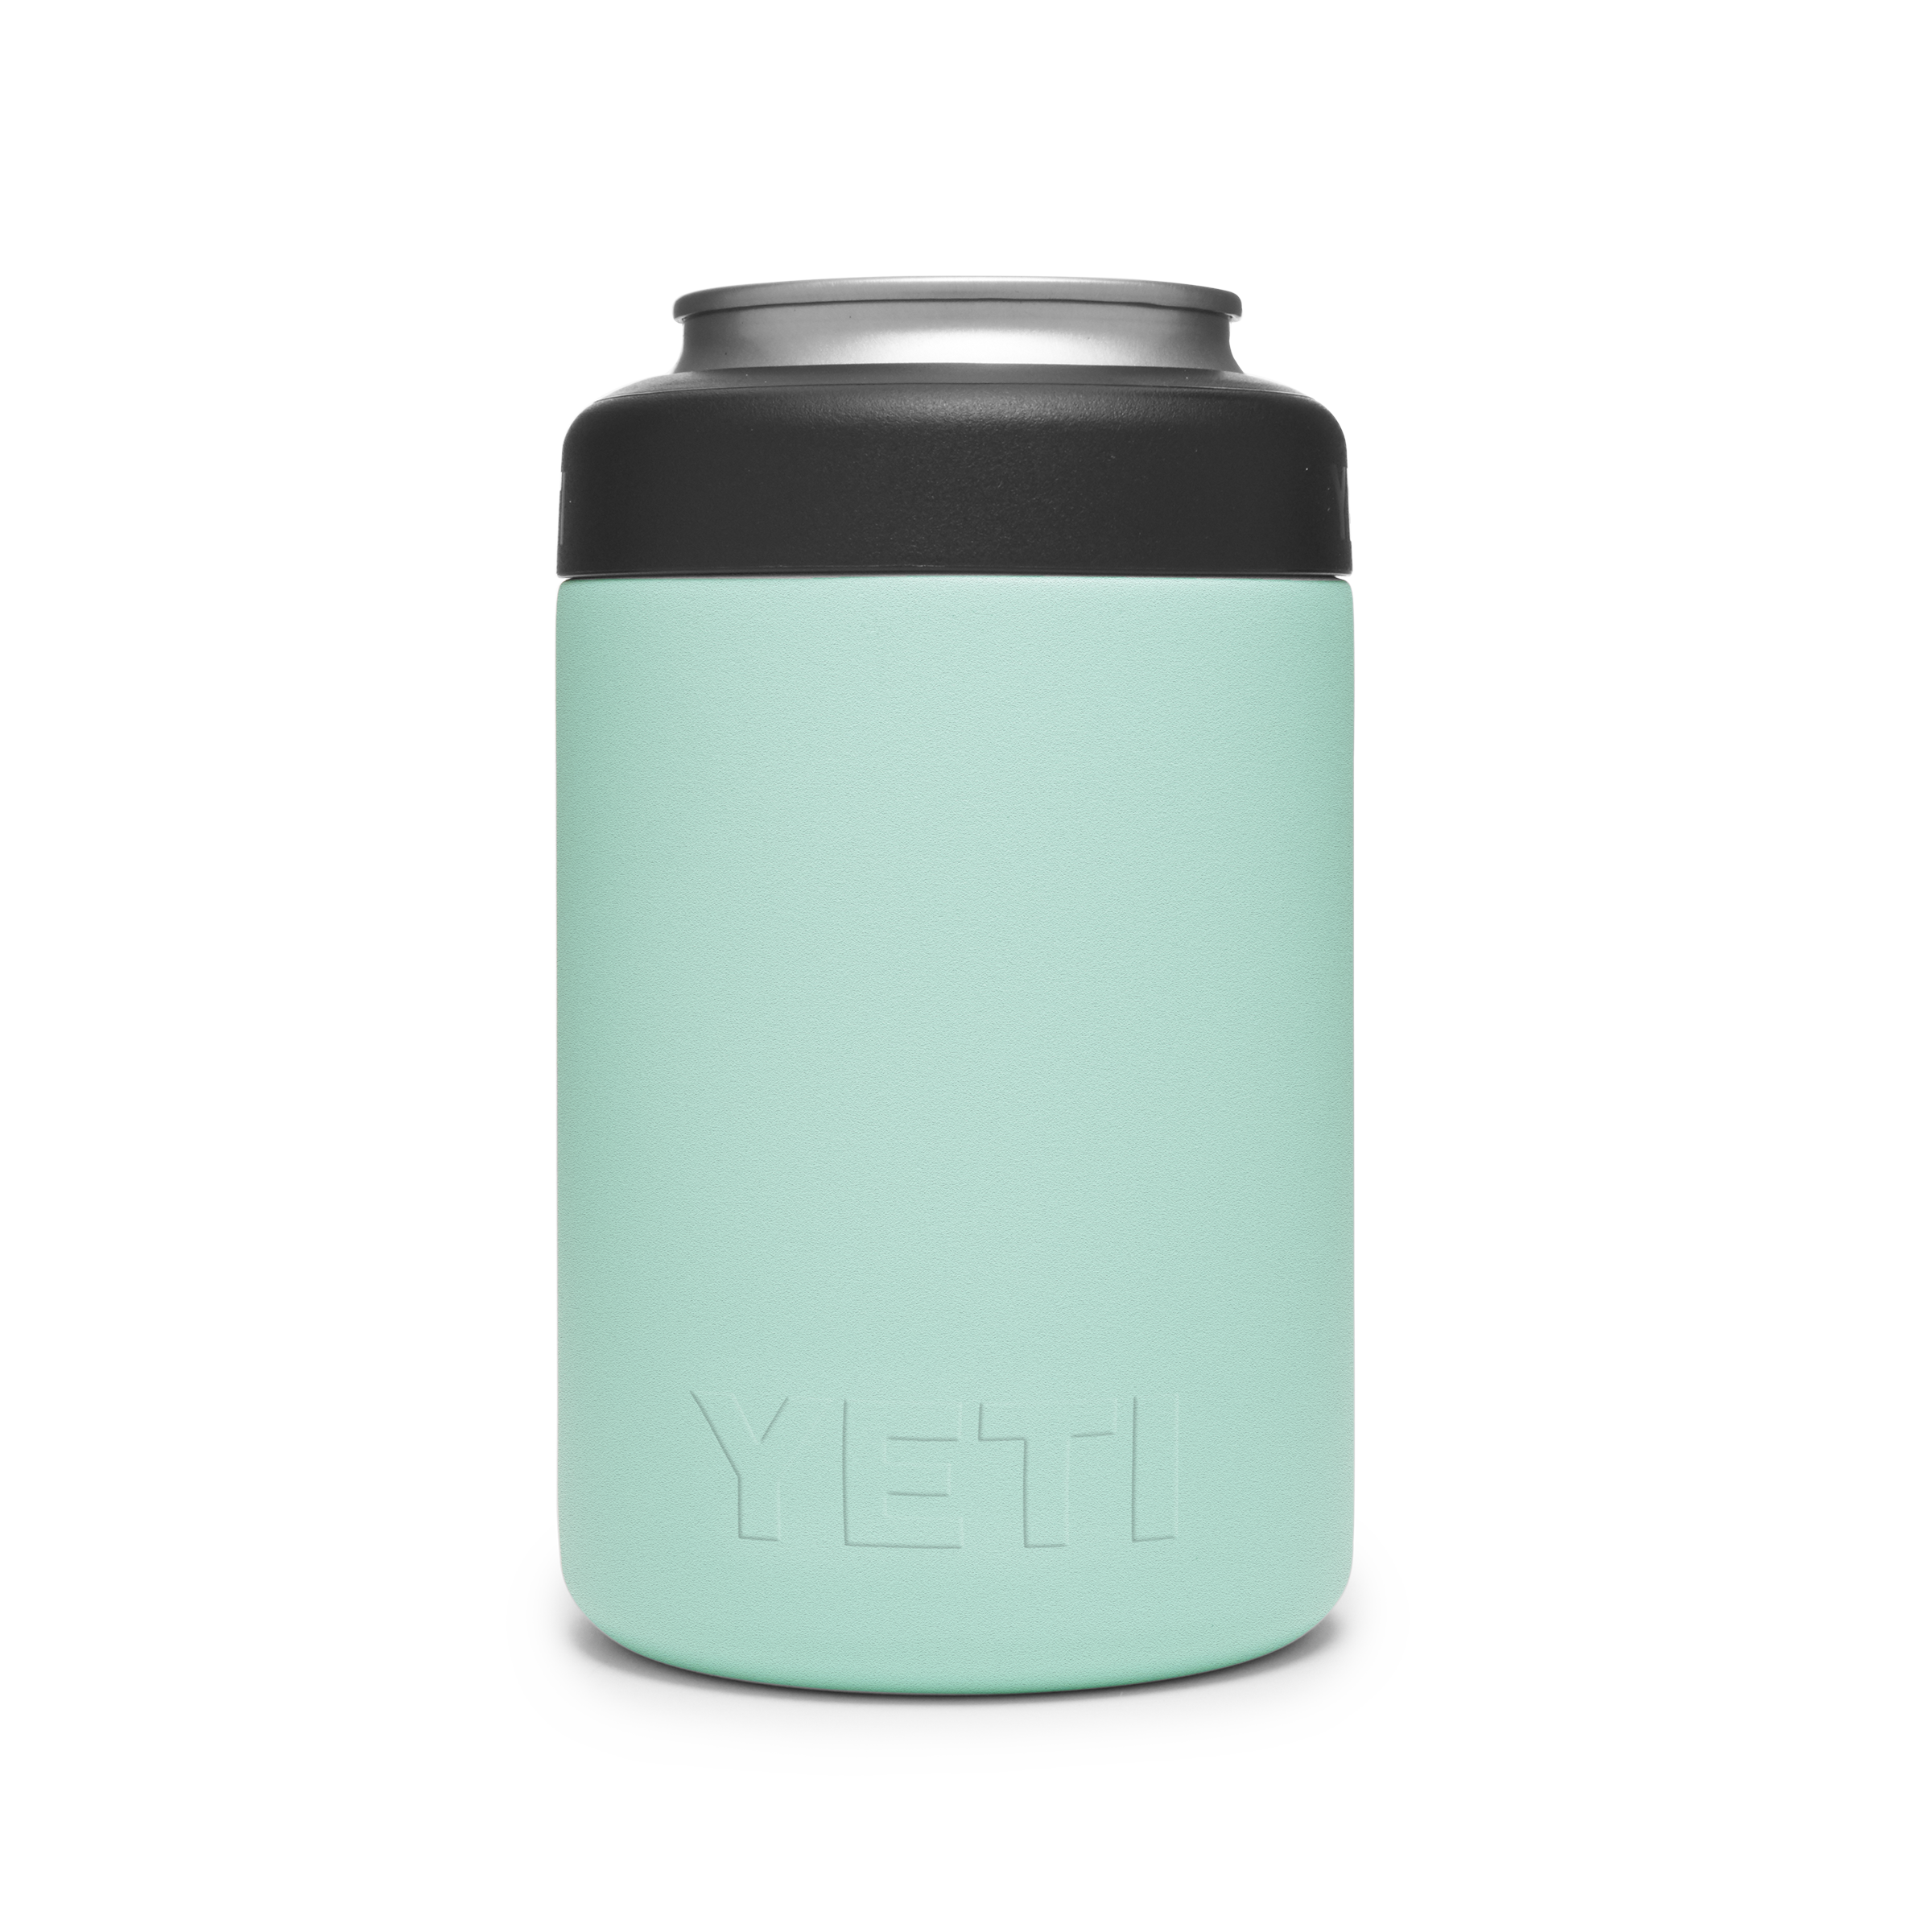 Yeti Slim Can Colsters Are Here • - Temecula Motorsports